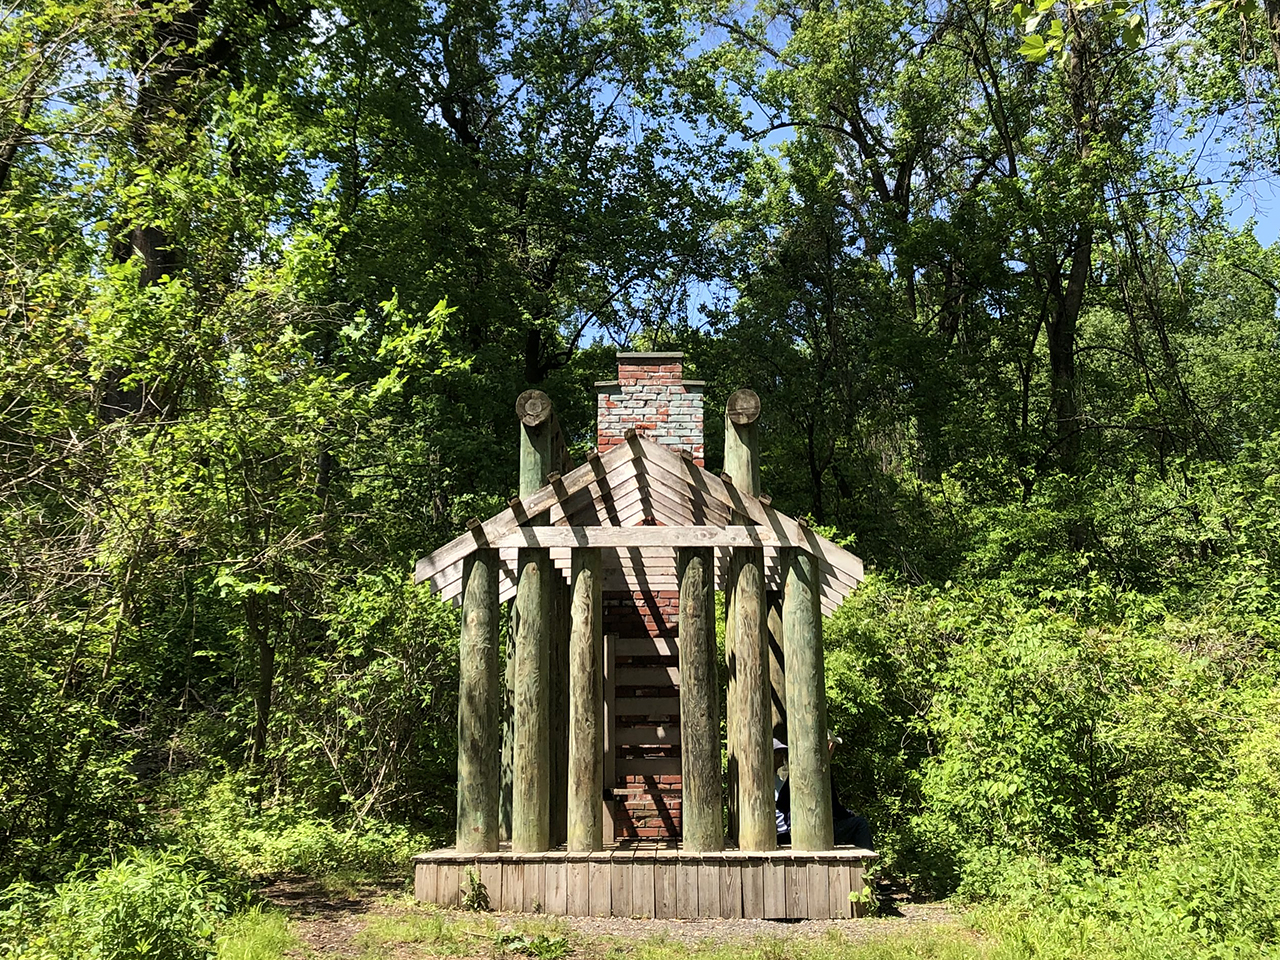 Thoreau's wooden hut in the park